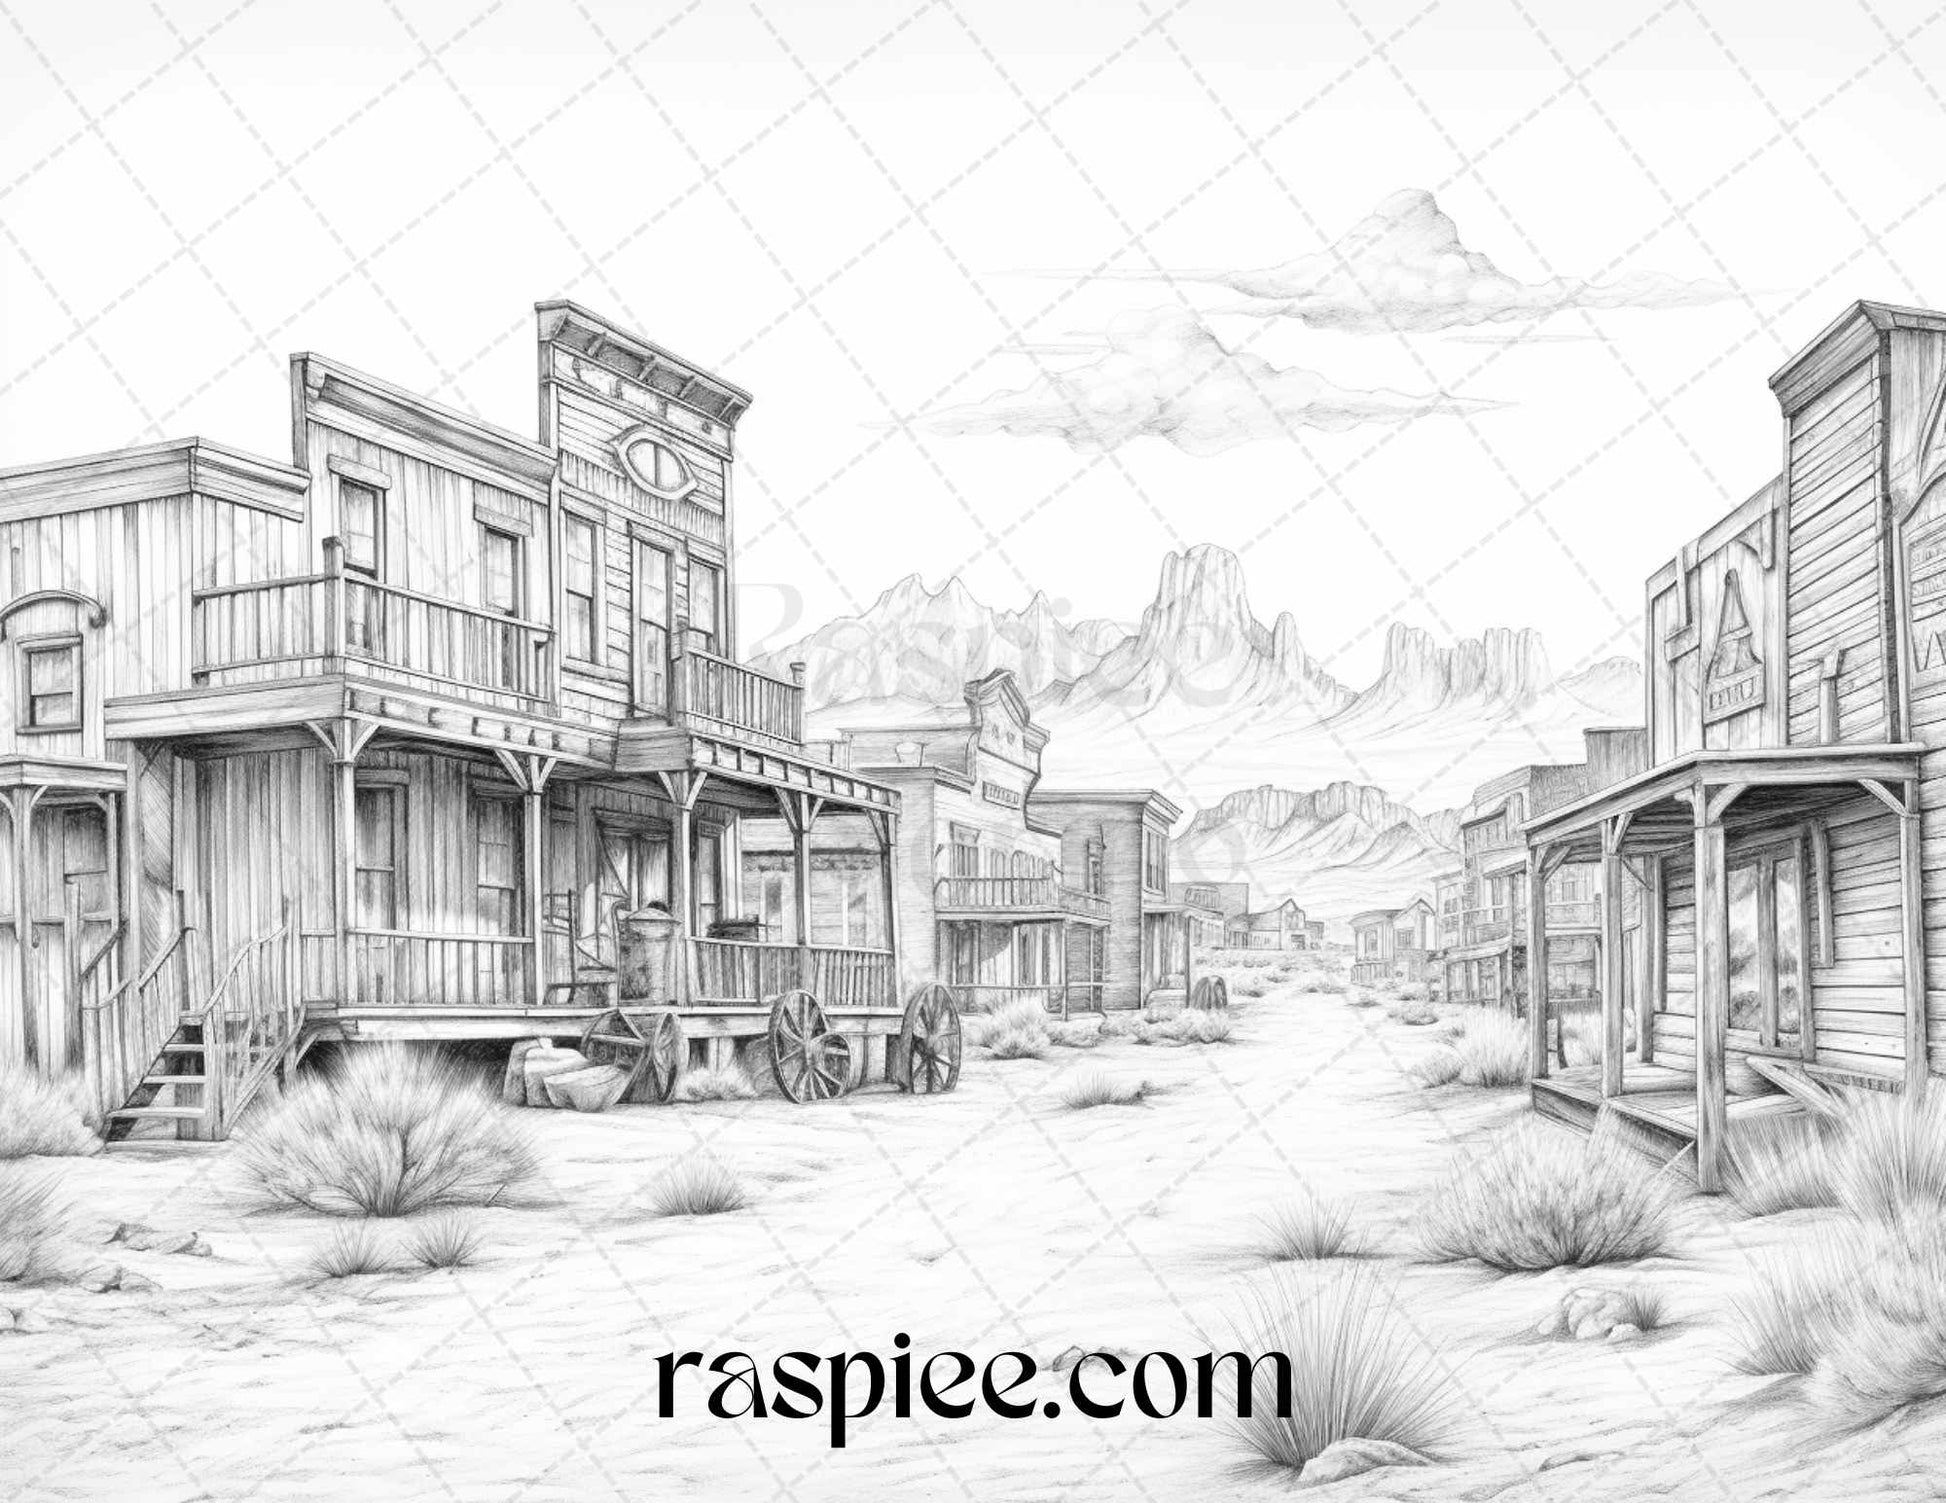 Wild West grayscale coloring pages, vintage Old West illustrations, adult printable coloring pages, western town scenes, cowboy art therapy, instant download coloring sheets